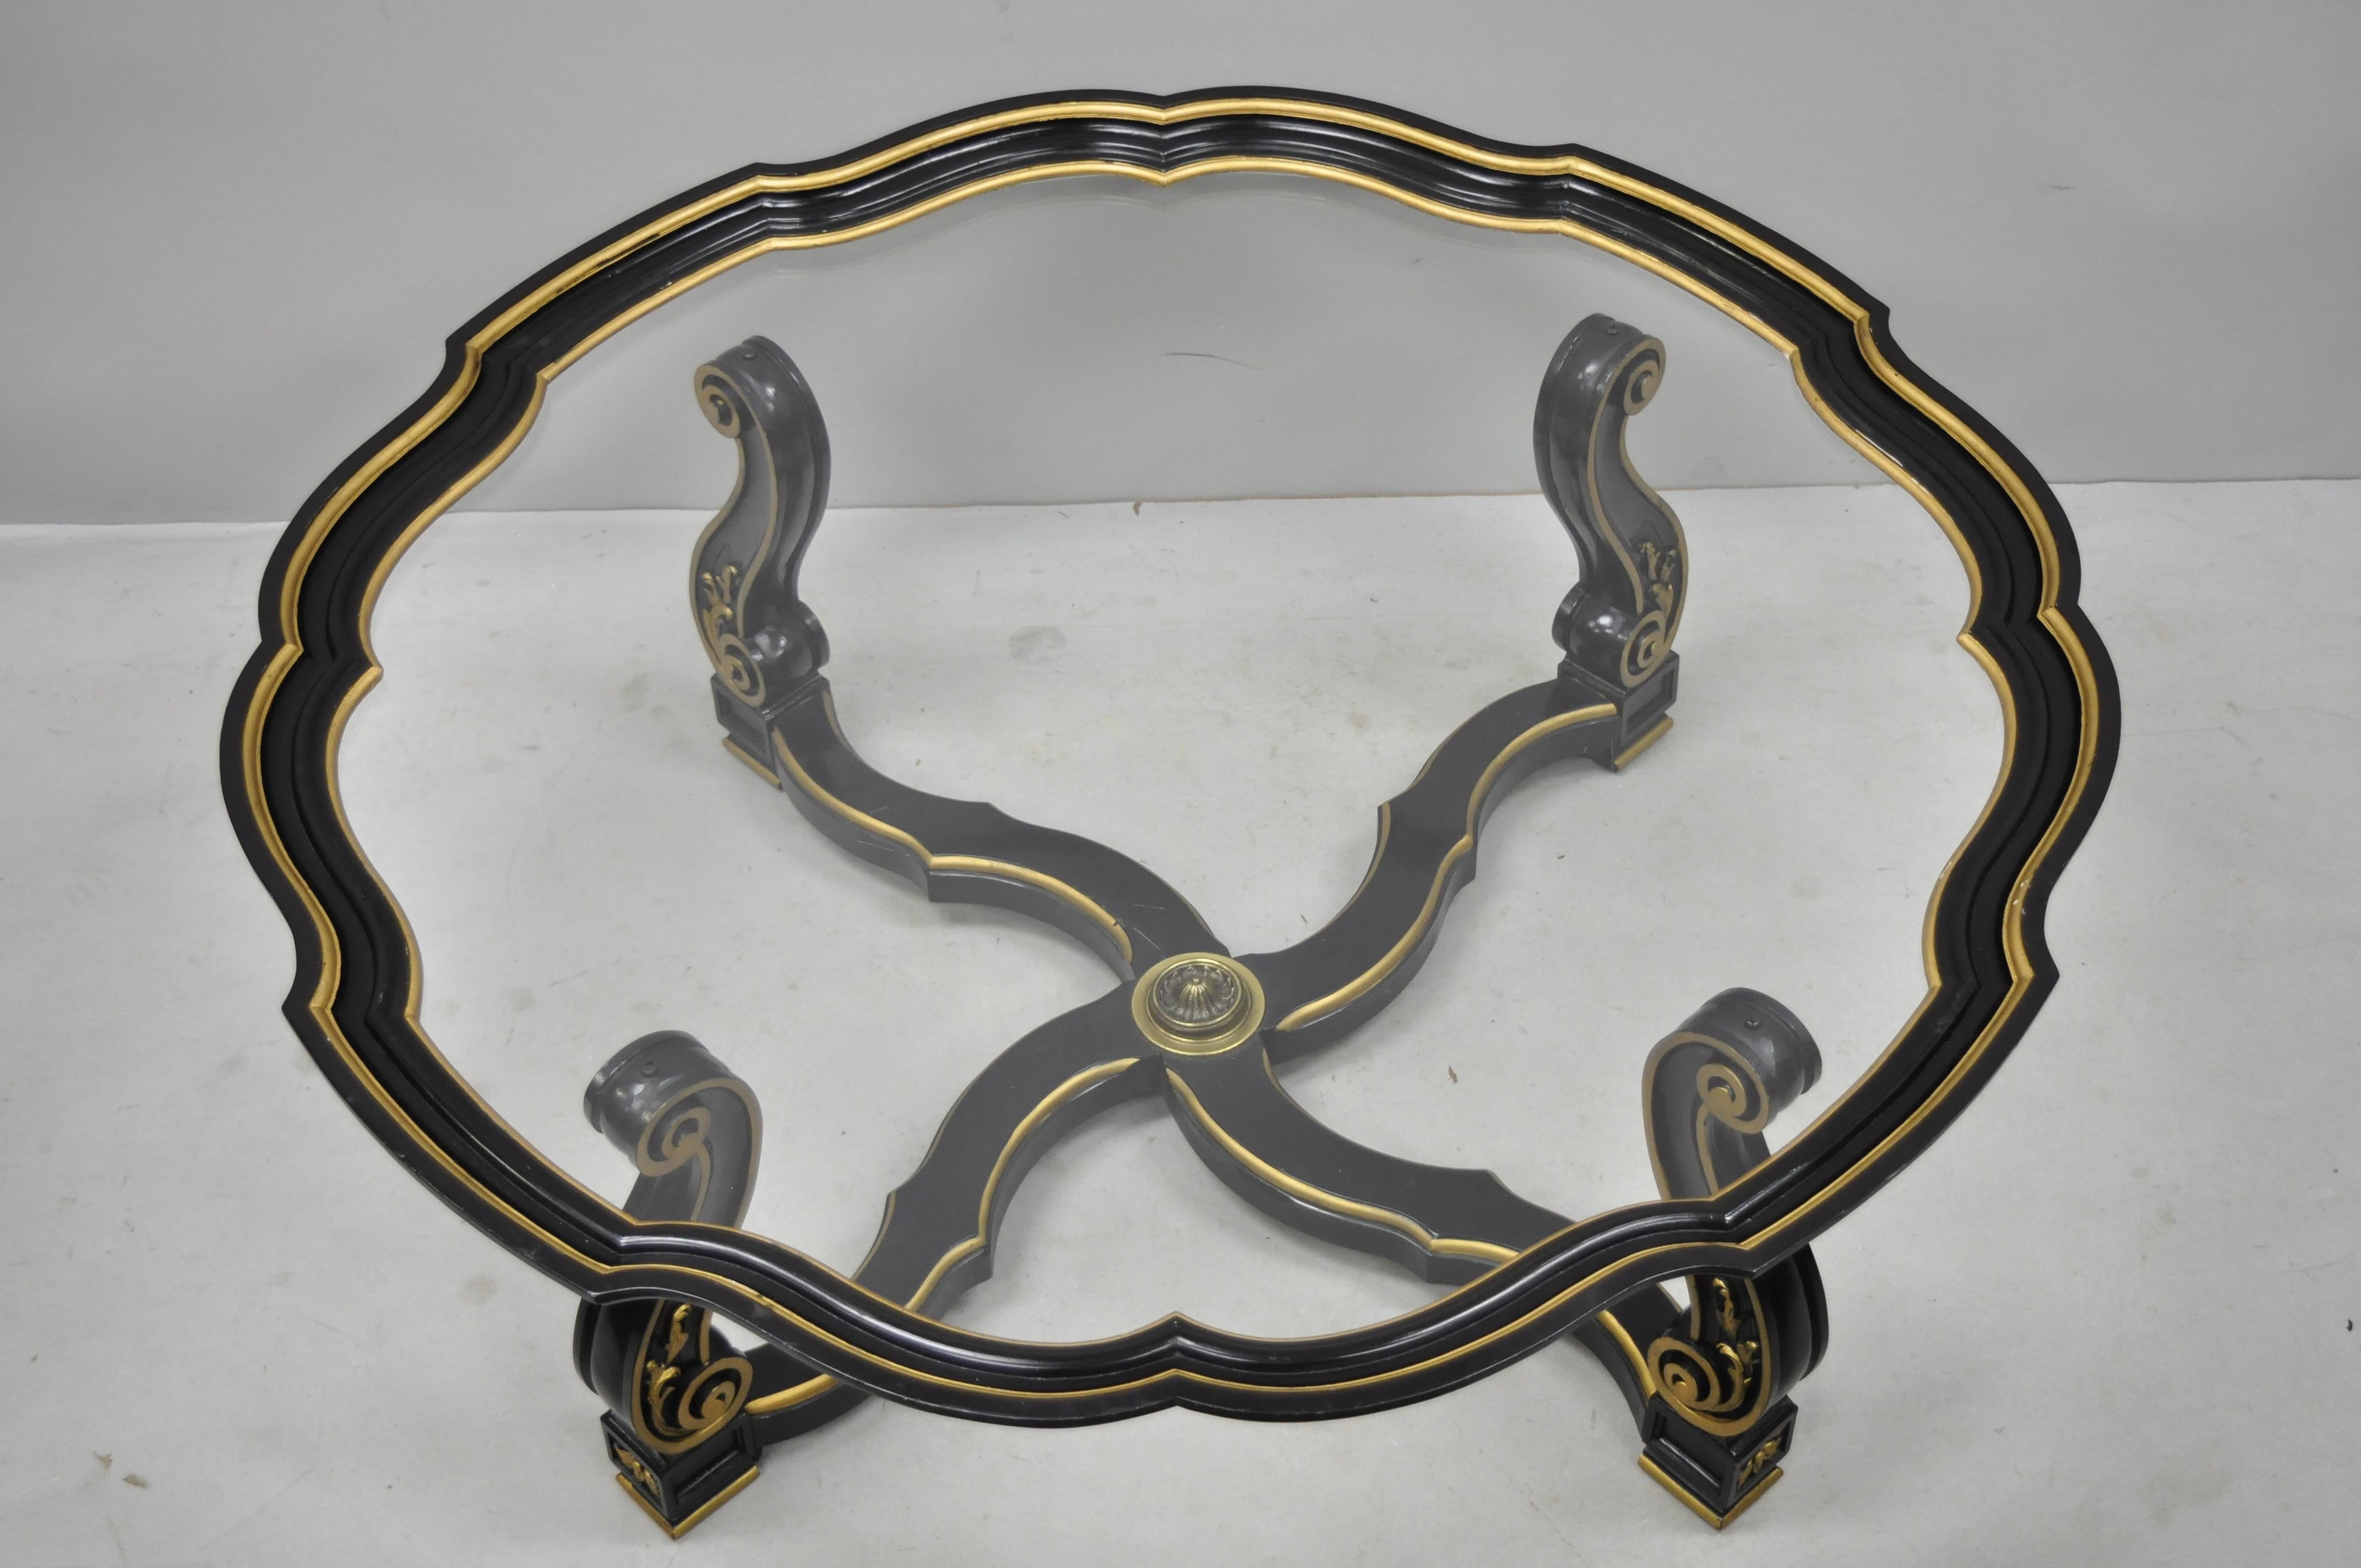 Vintage black and gold French style Hollywood Regency tray coffee table with scalloped edge. Item features black and gold painted finish, carved base, glass top, shaped border, brass finial, great style and form, circa mid-20th century.